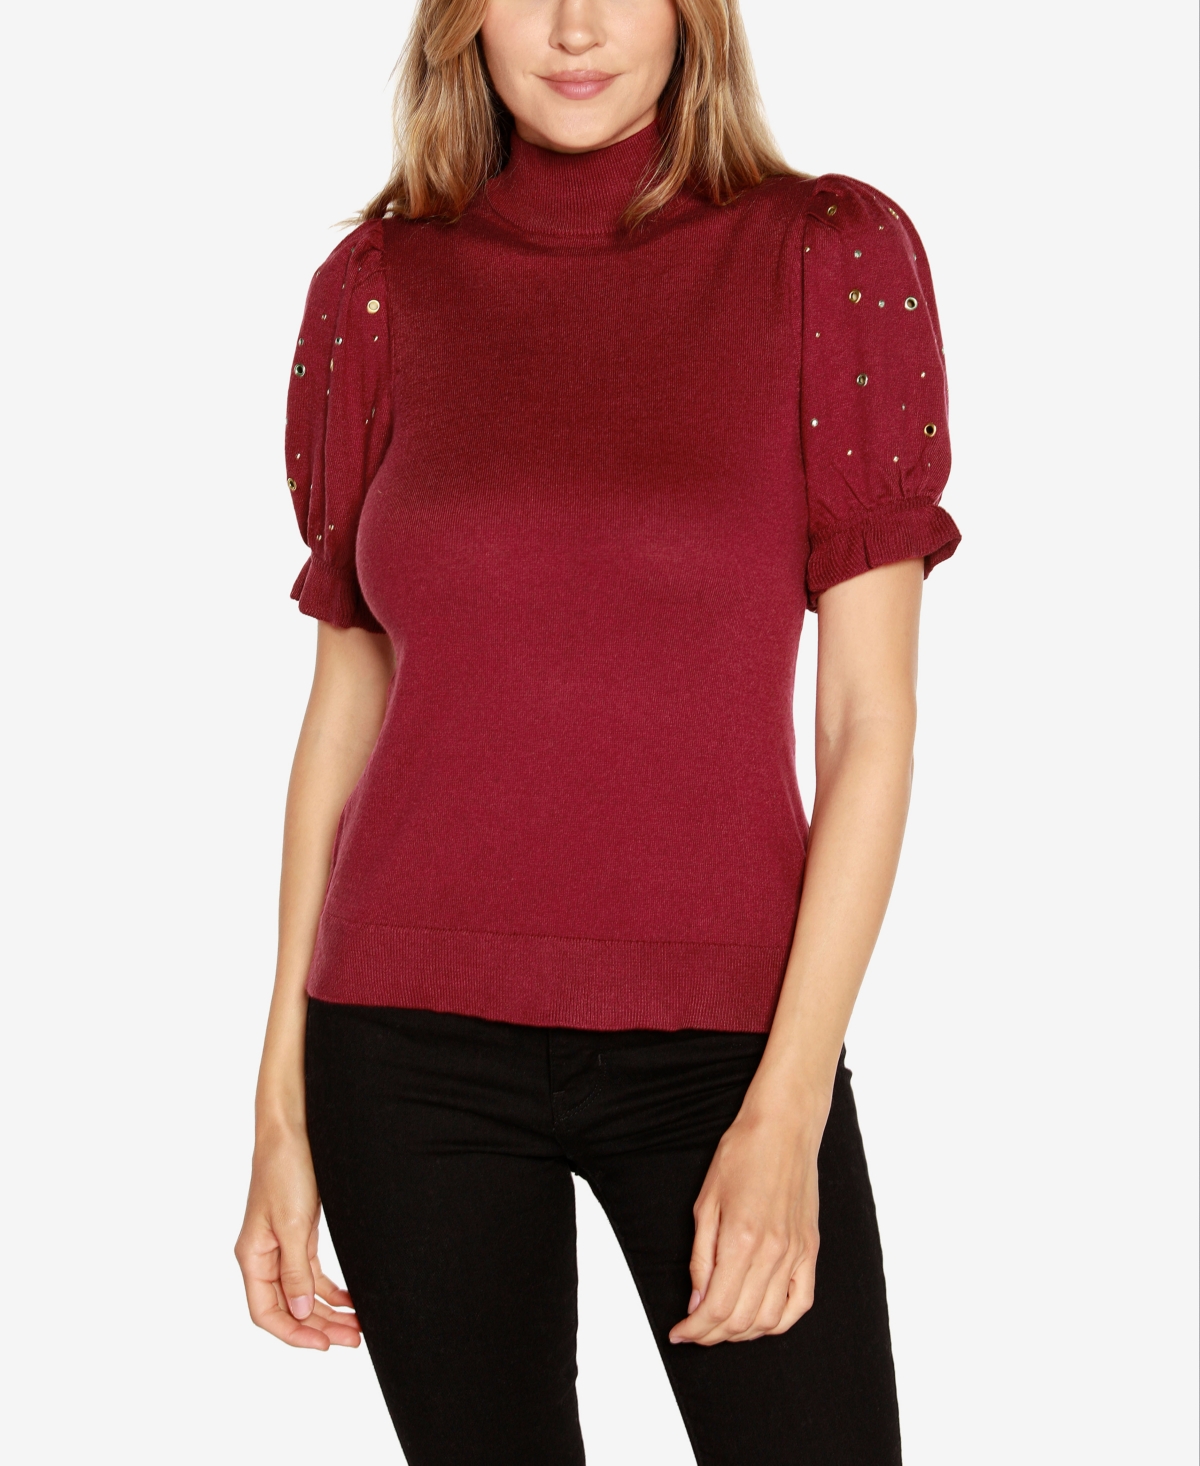 Black Label Women's Embellished Puff-Sleeve Sweater - Cranberry